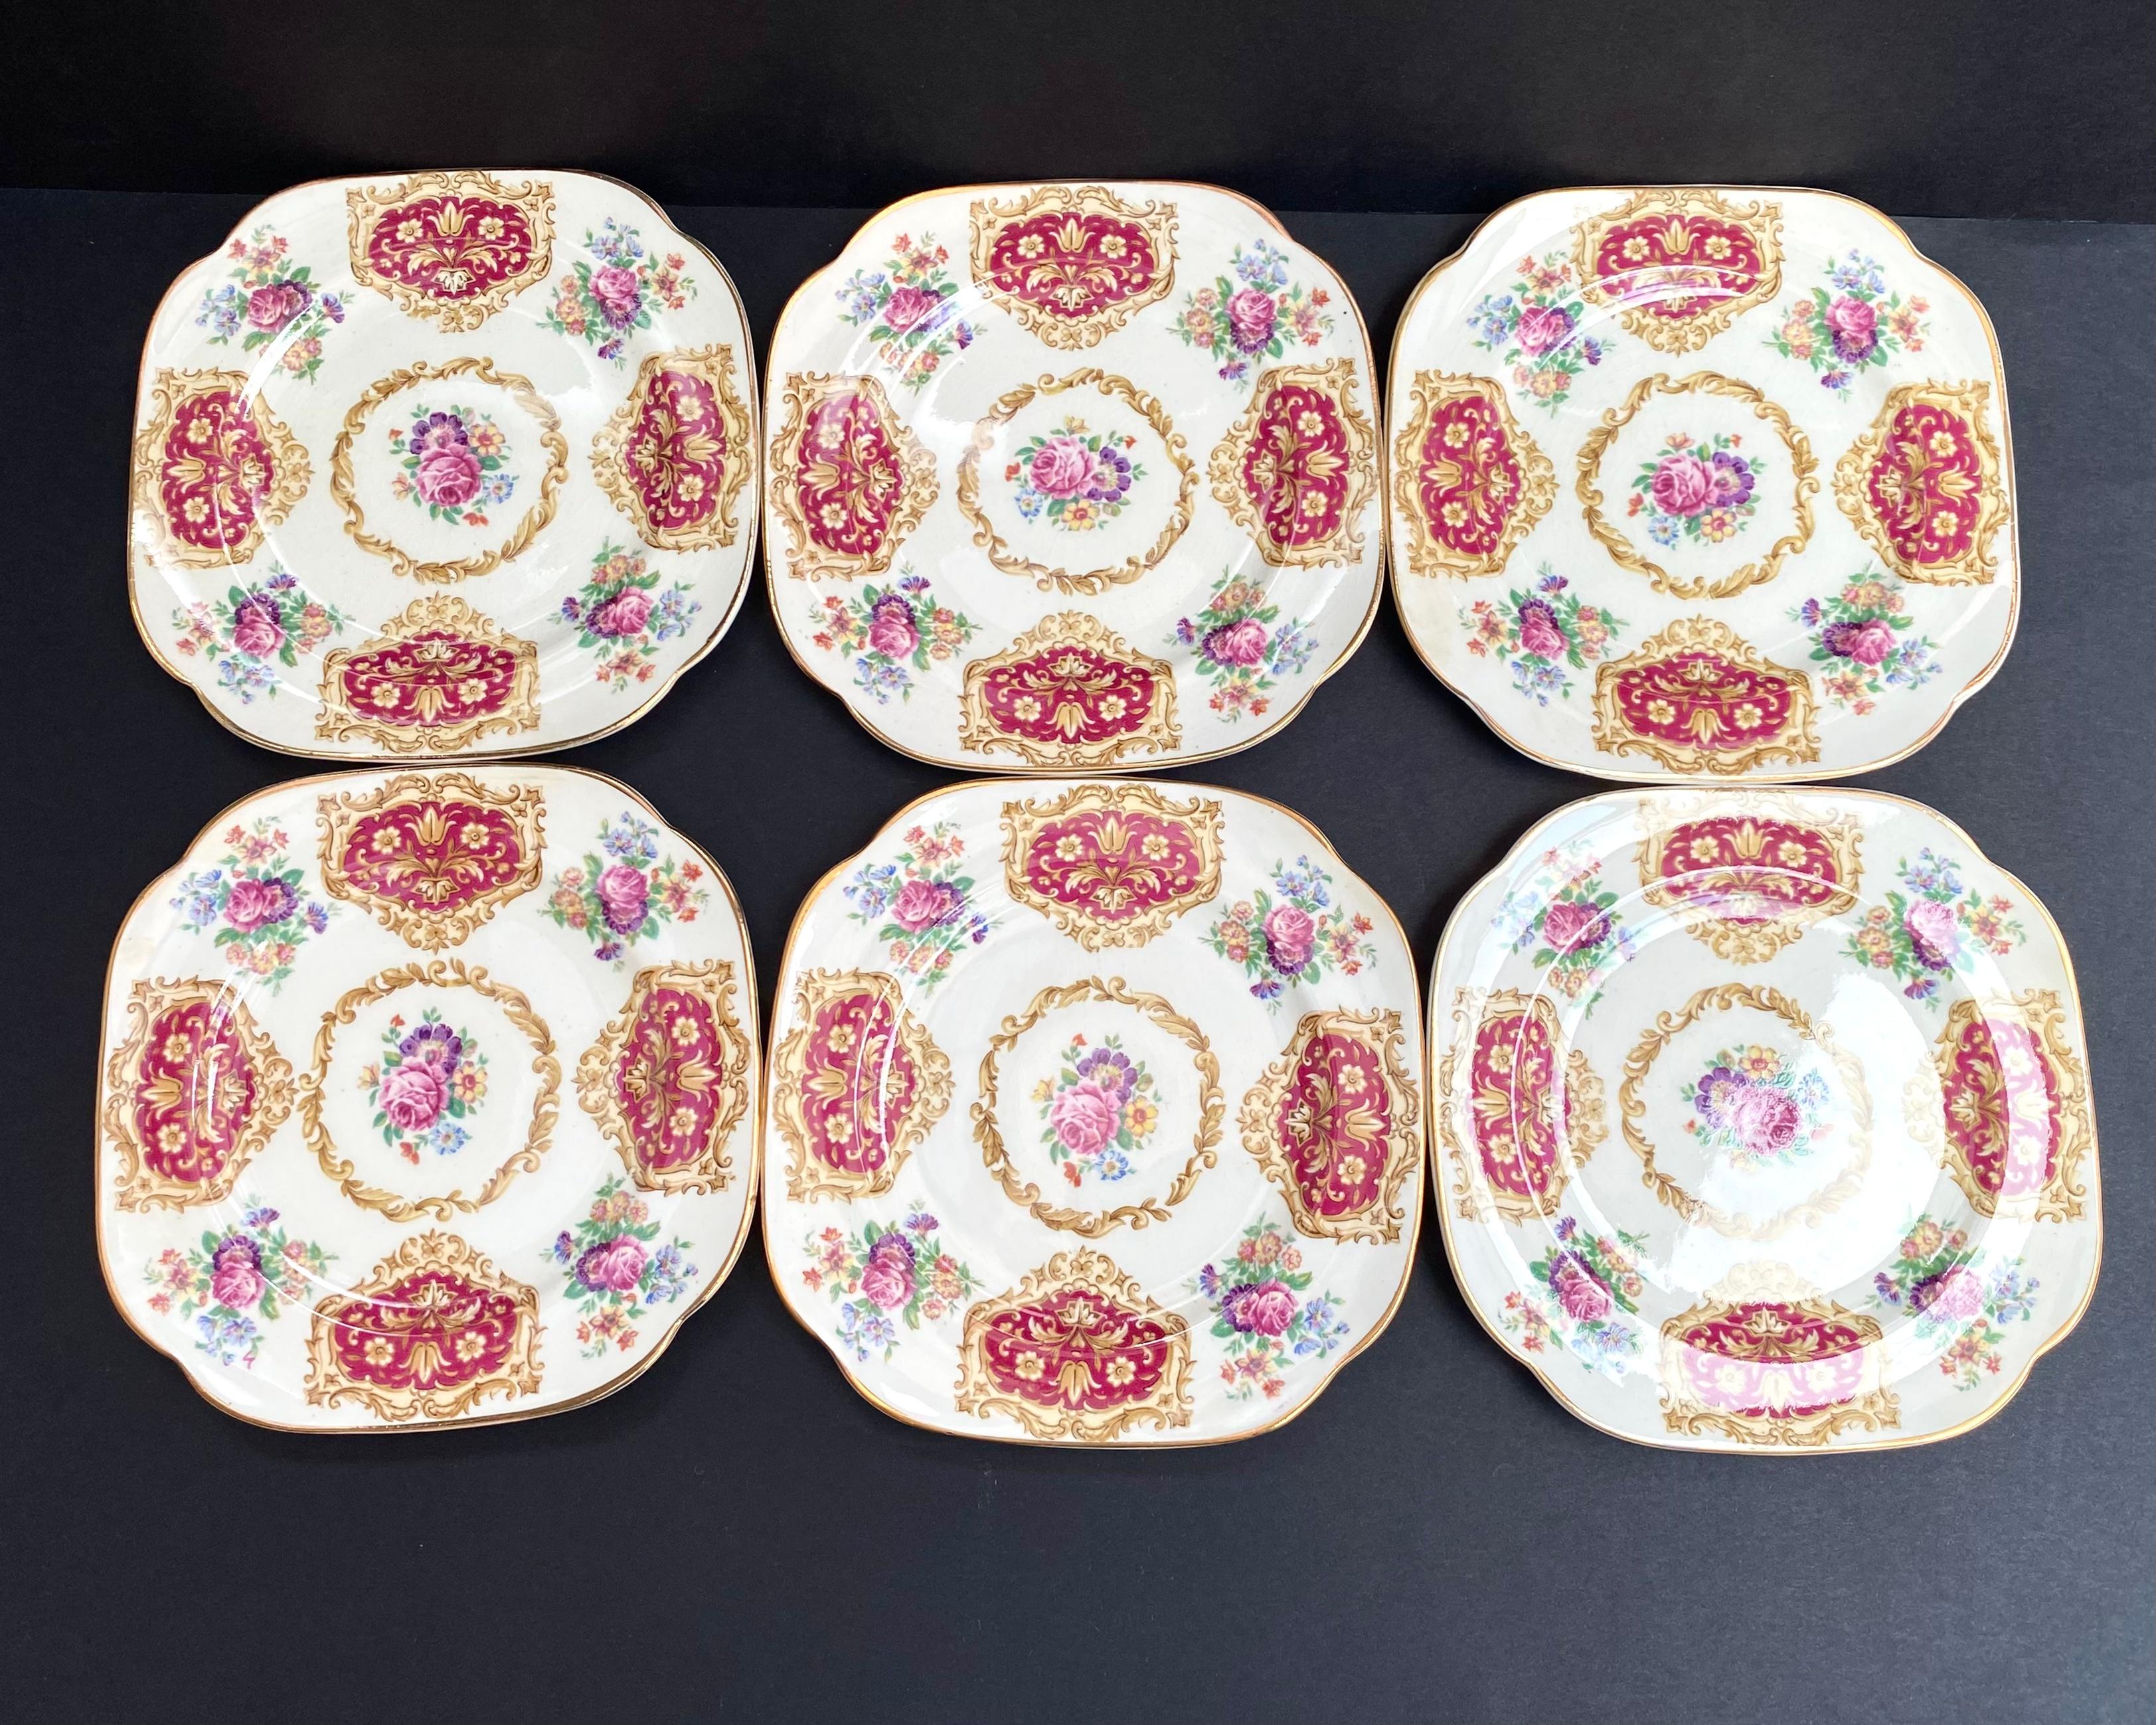 Victorian style Antique Set 6 porcelain dessert plates with craquelure by James Kent Ltd. Langton, England.

Maroon red insets with tan flowers and tan scrolls. Pink rose and blue and purple flower bouquets. Gold trim.

It has the marking ‘James